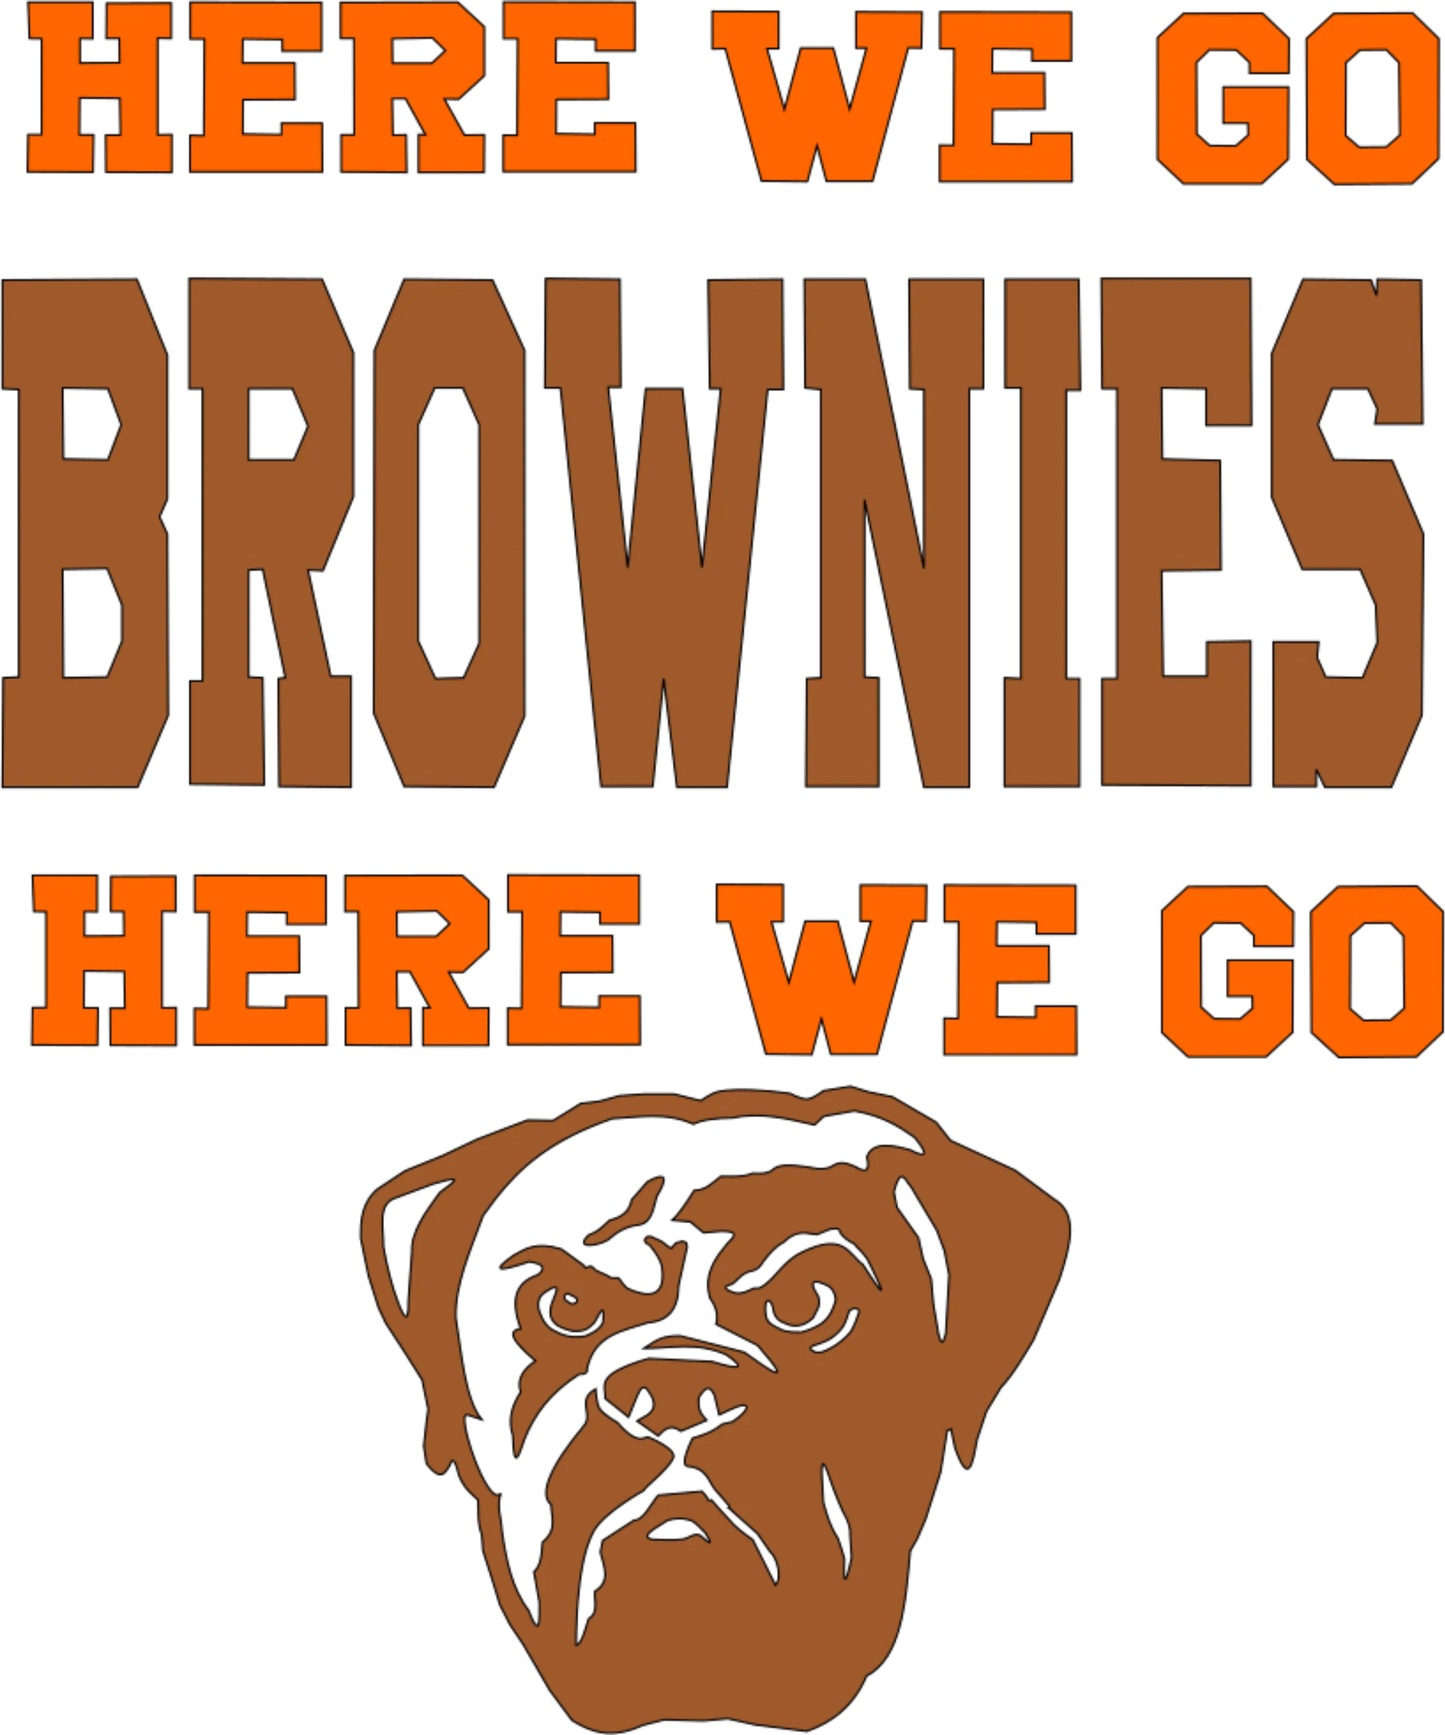 CLB6 - "Here we go Brownies" DTF Transfer, DTF Transfer, Apparel & Accessories, Ace DTF